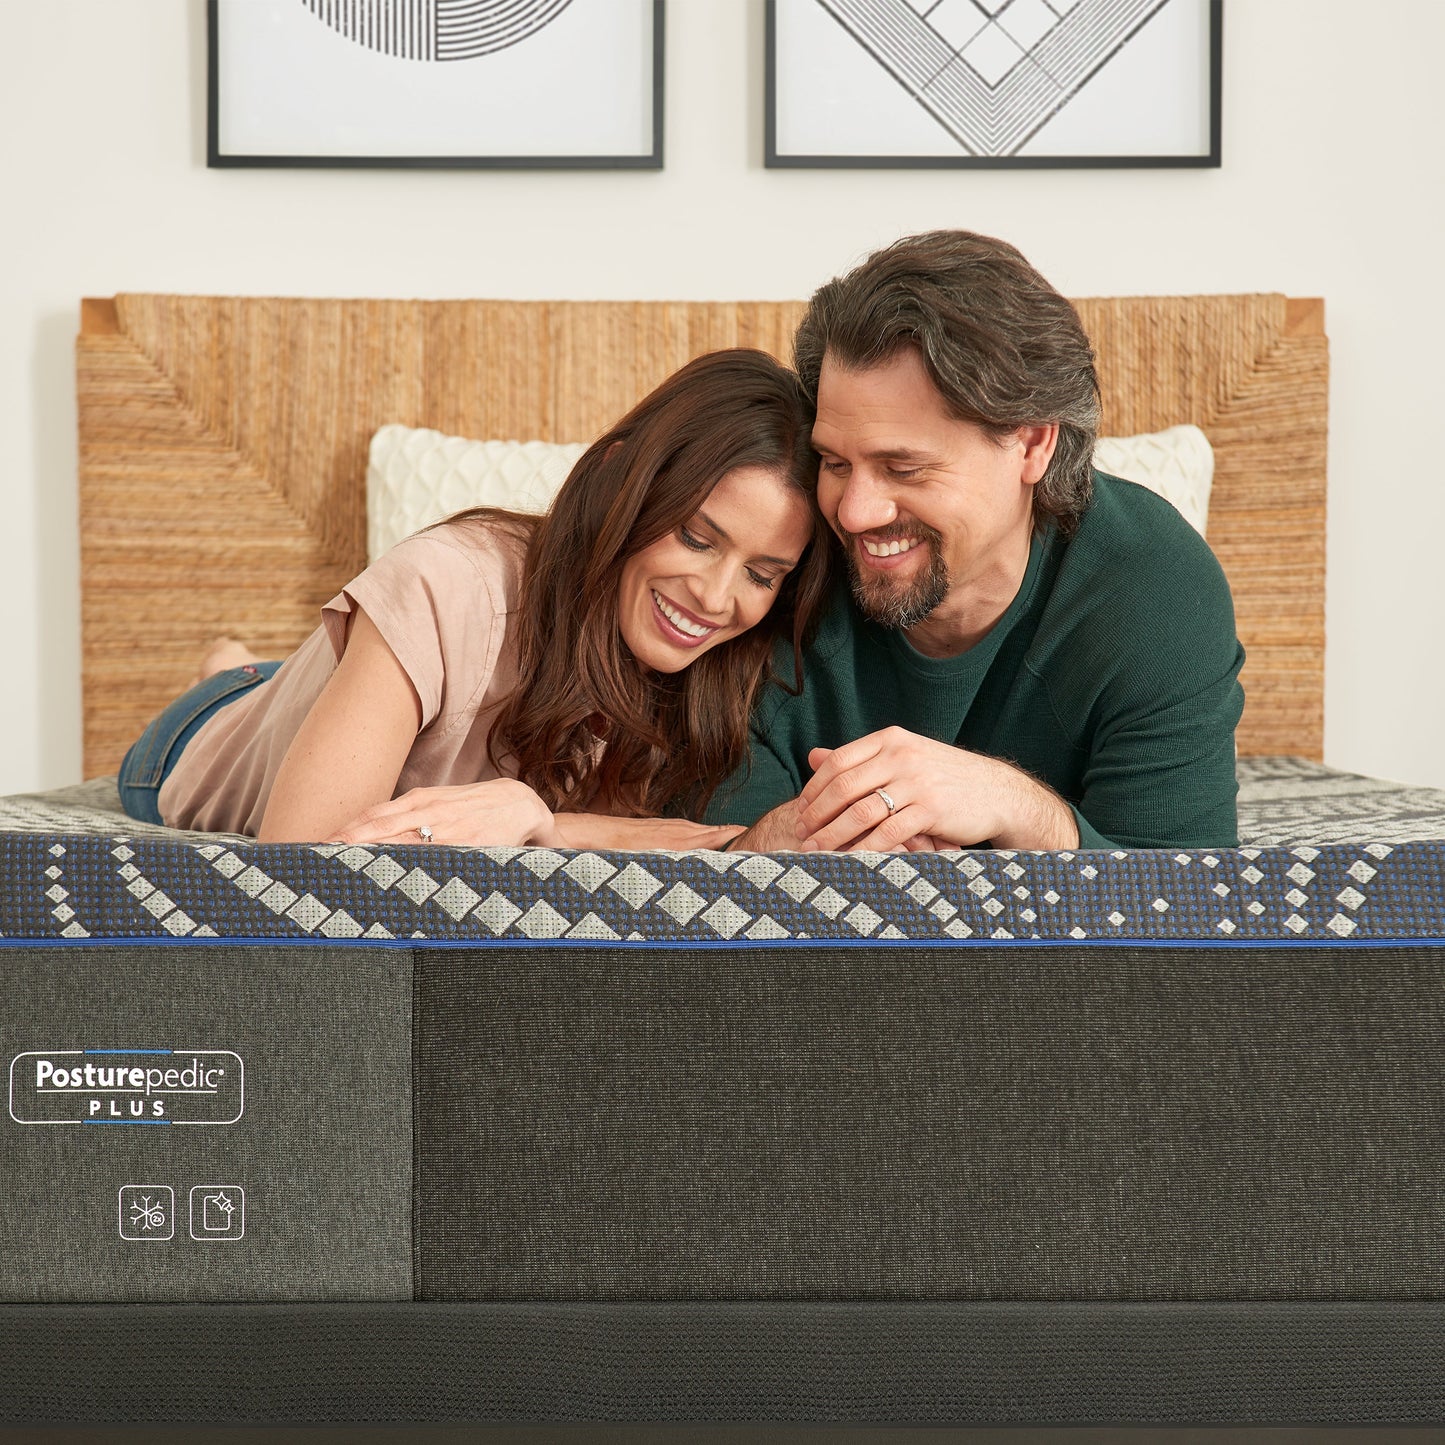 Couple Relaxing On A Sealy Albany Soft Mattress In Bedroom